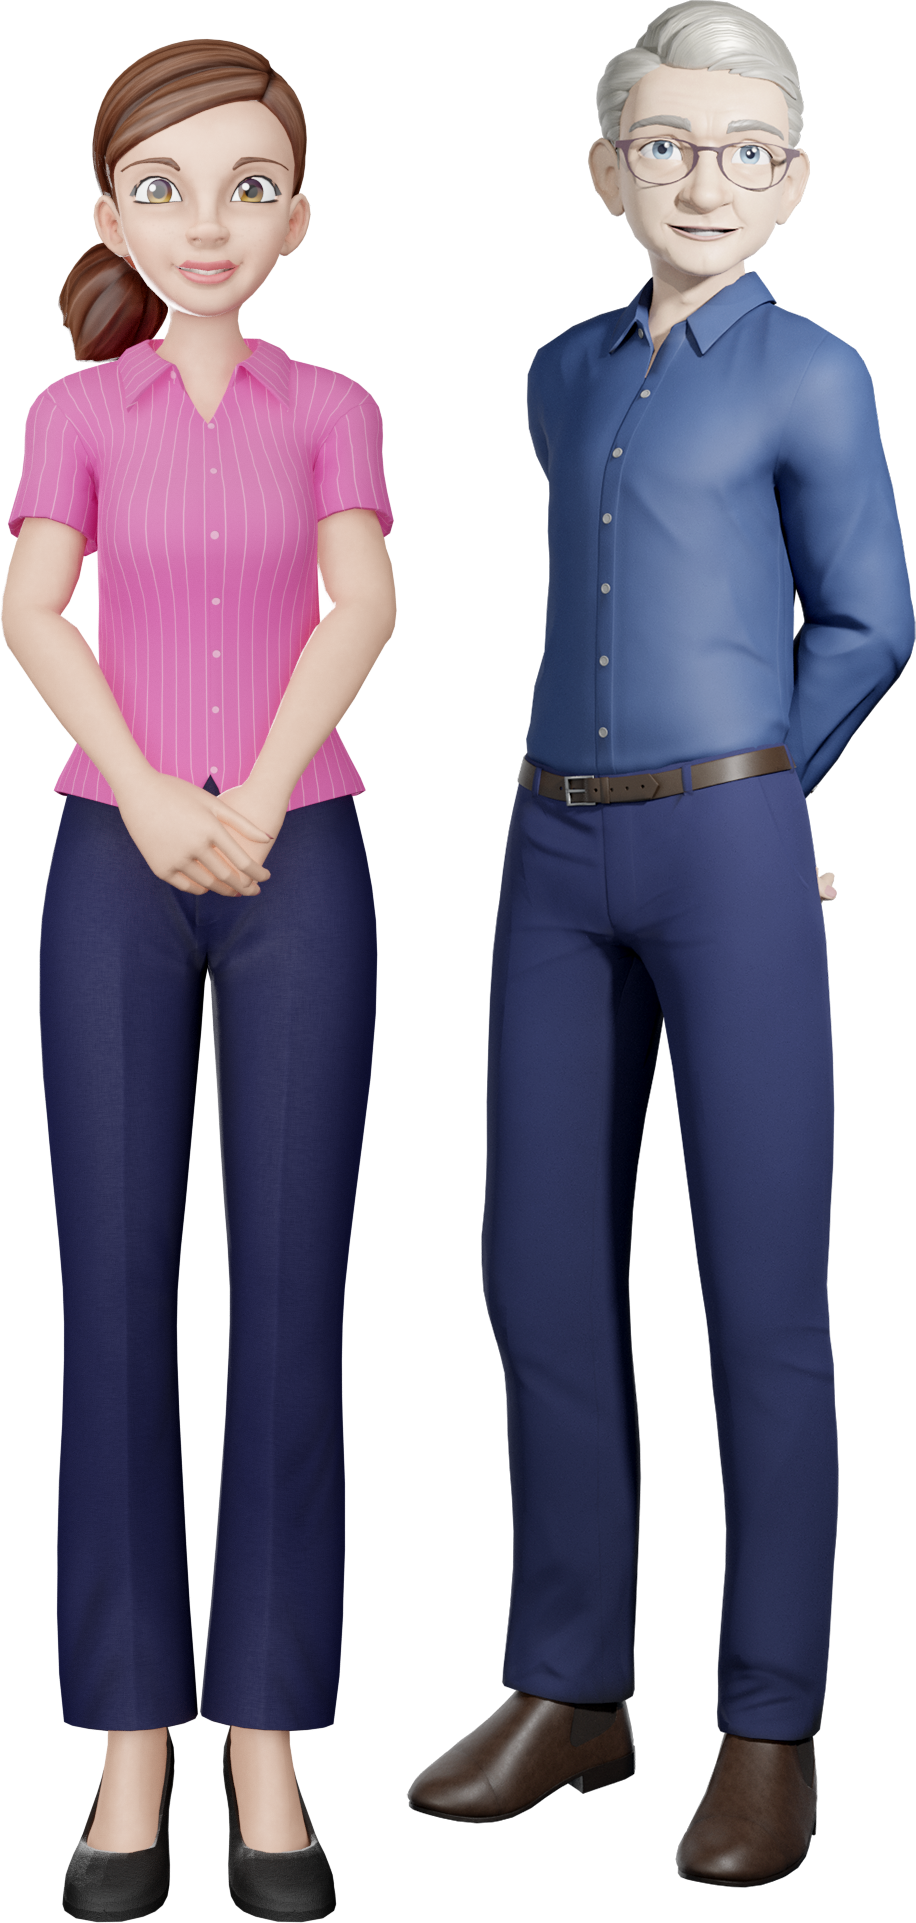 Clevertar Chatbot Characters Male & Female